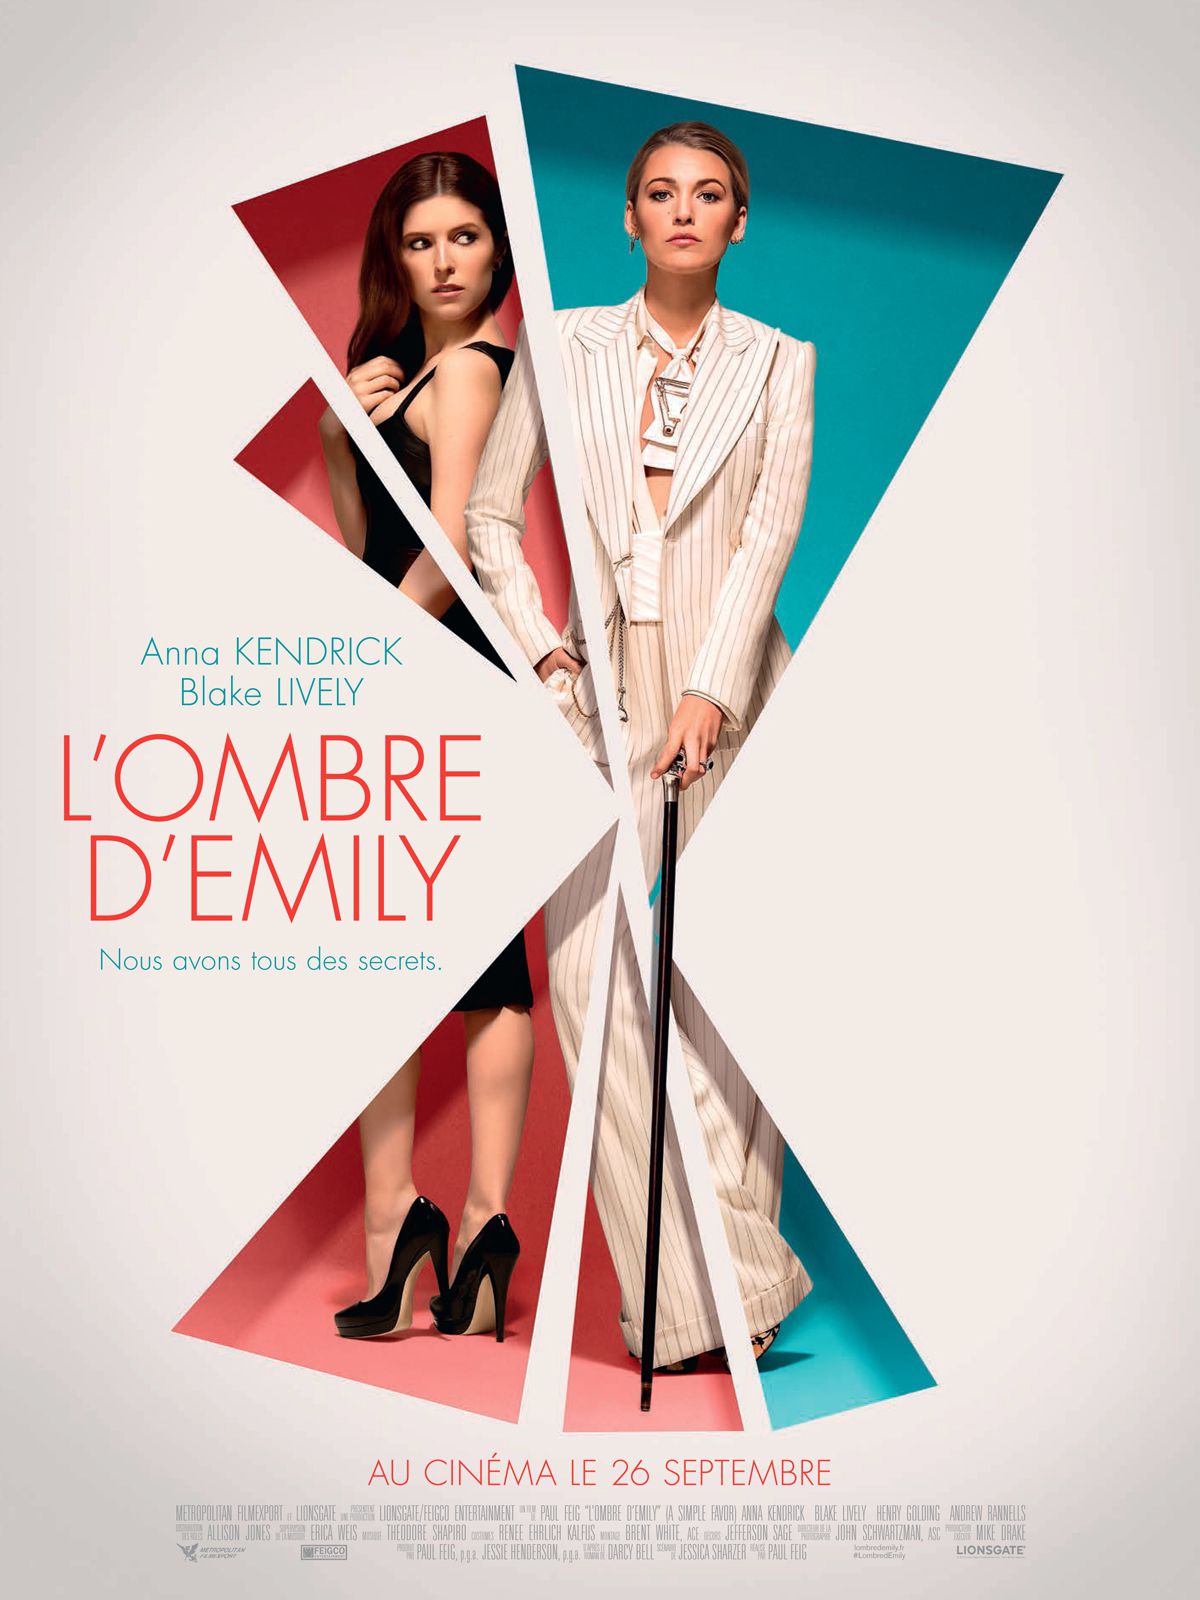 L'Ombre d'Emily - Film (2018) streaming VF gratuit complet